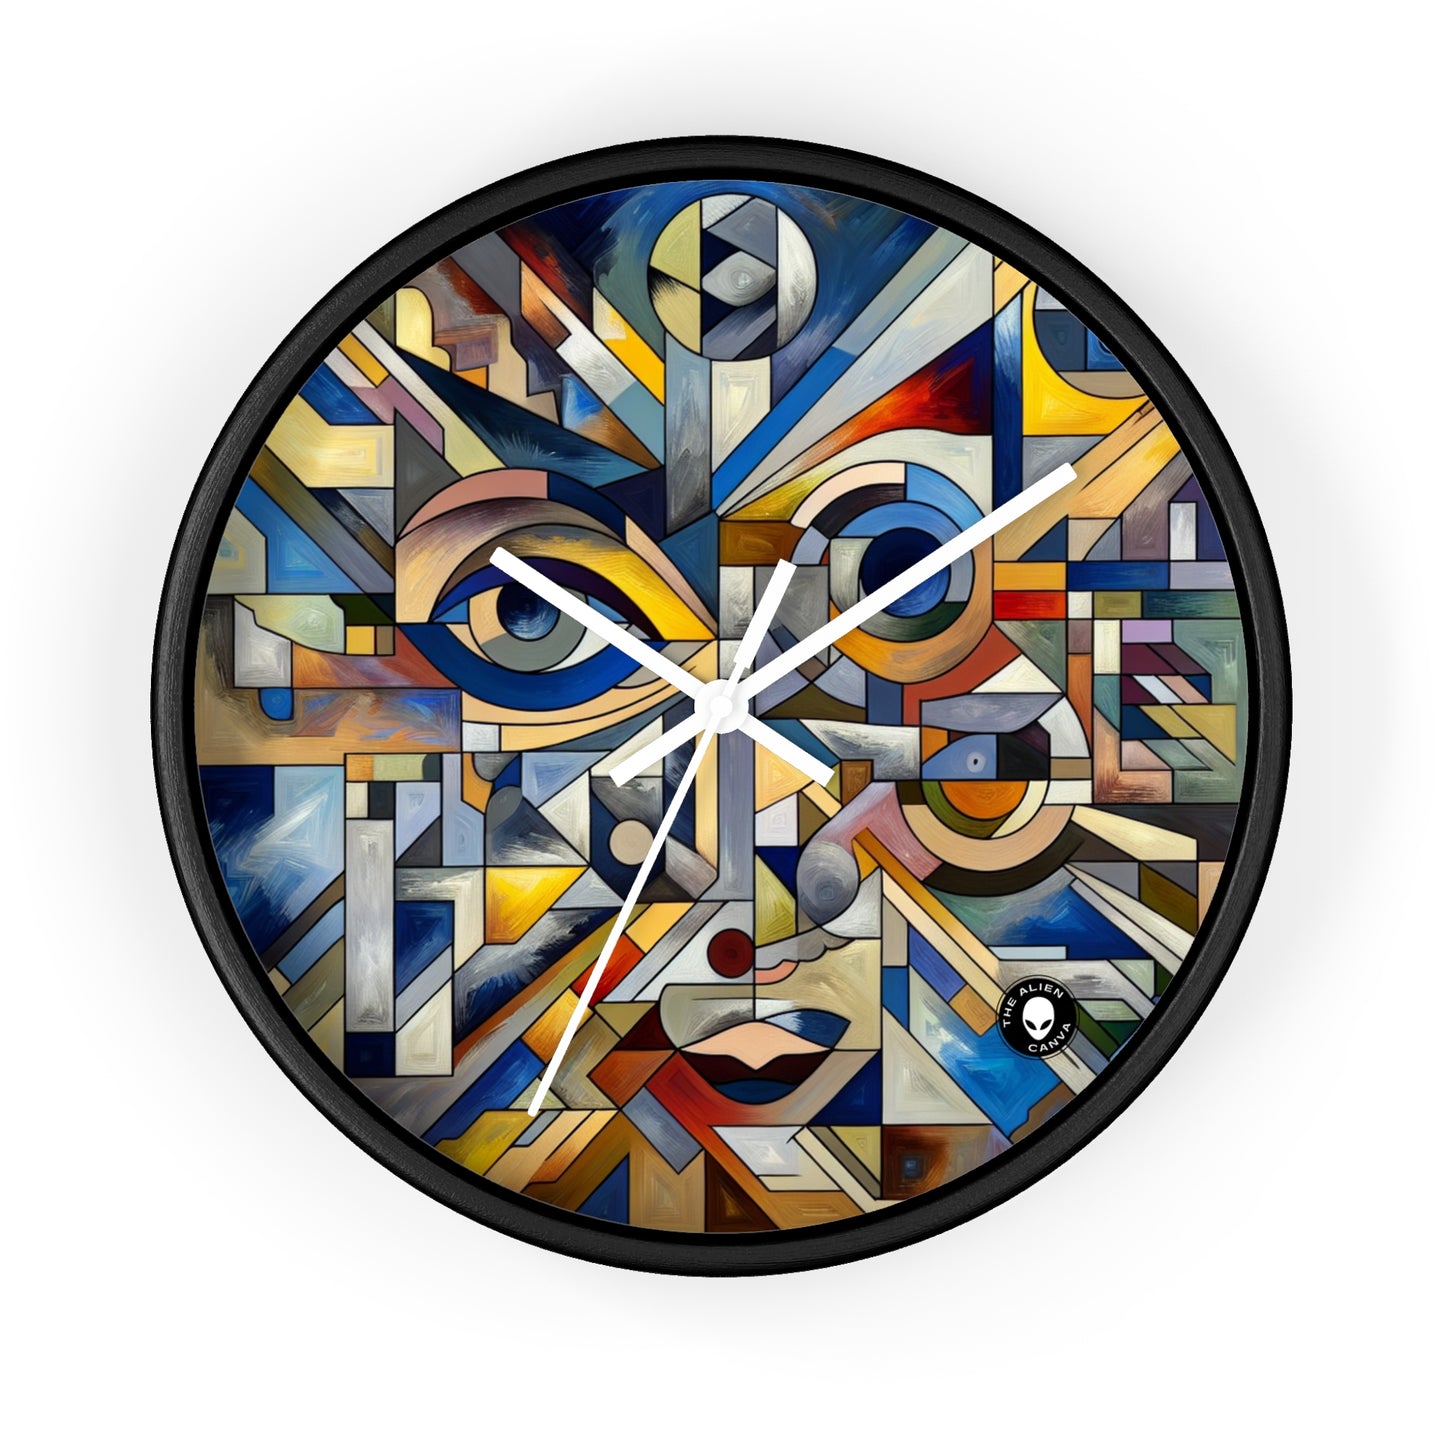 "Urban Fragmentation: An Analytical Cubist Cityscape" - The Alien Wall Clock Analytical Cubism